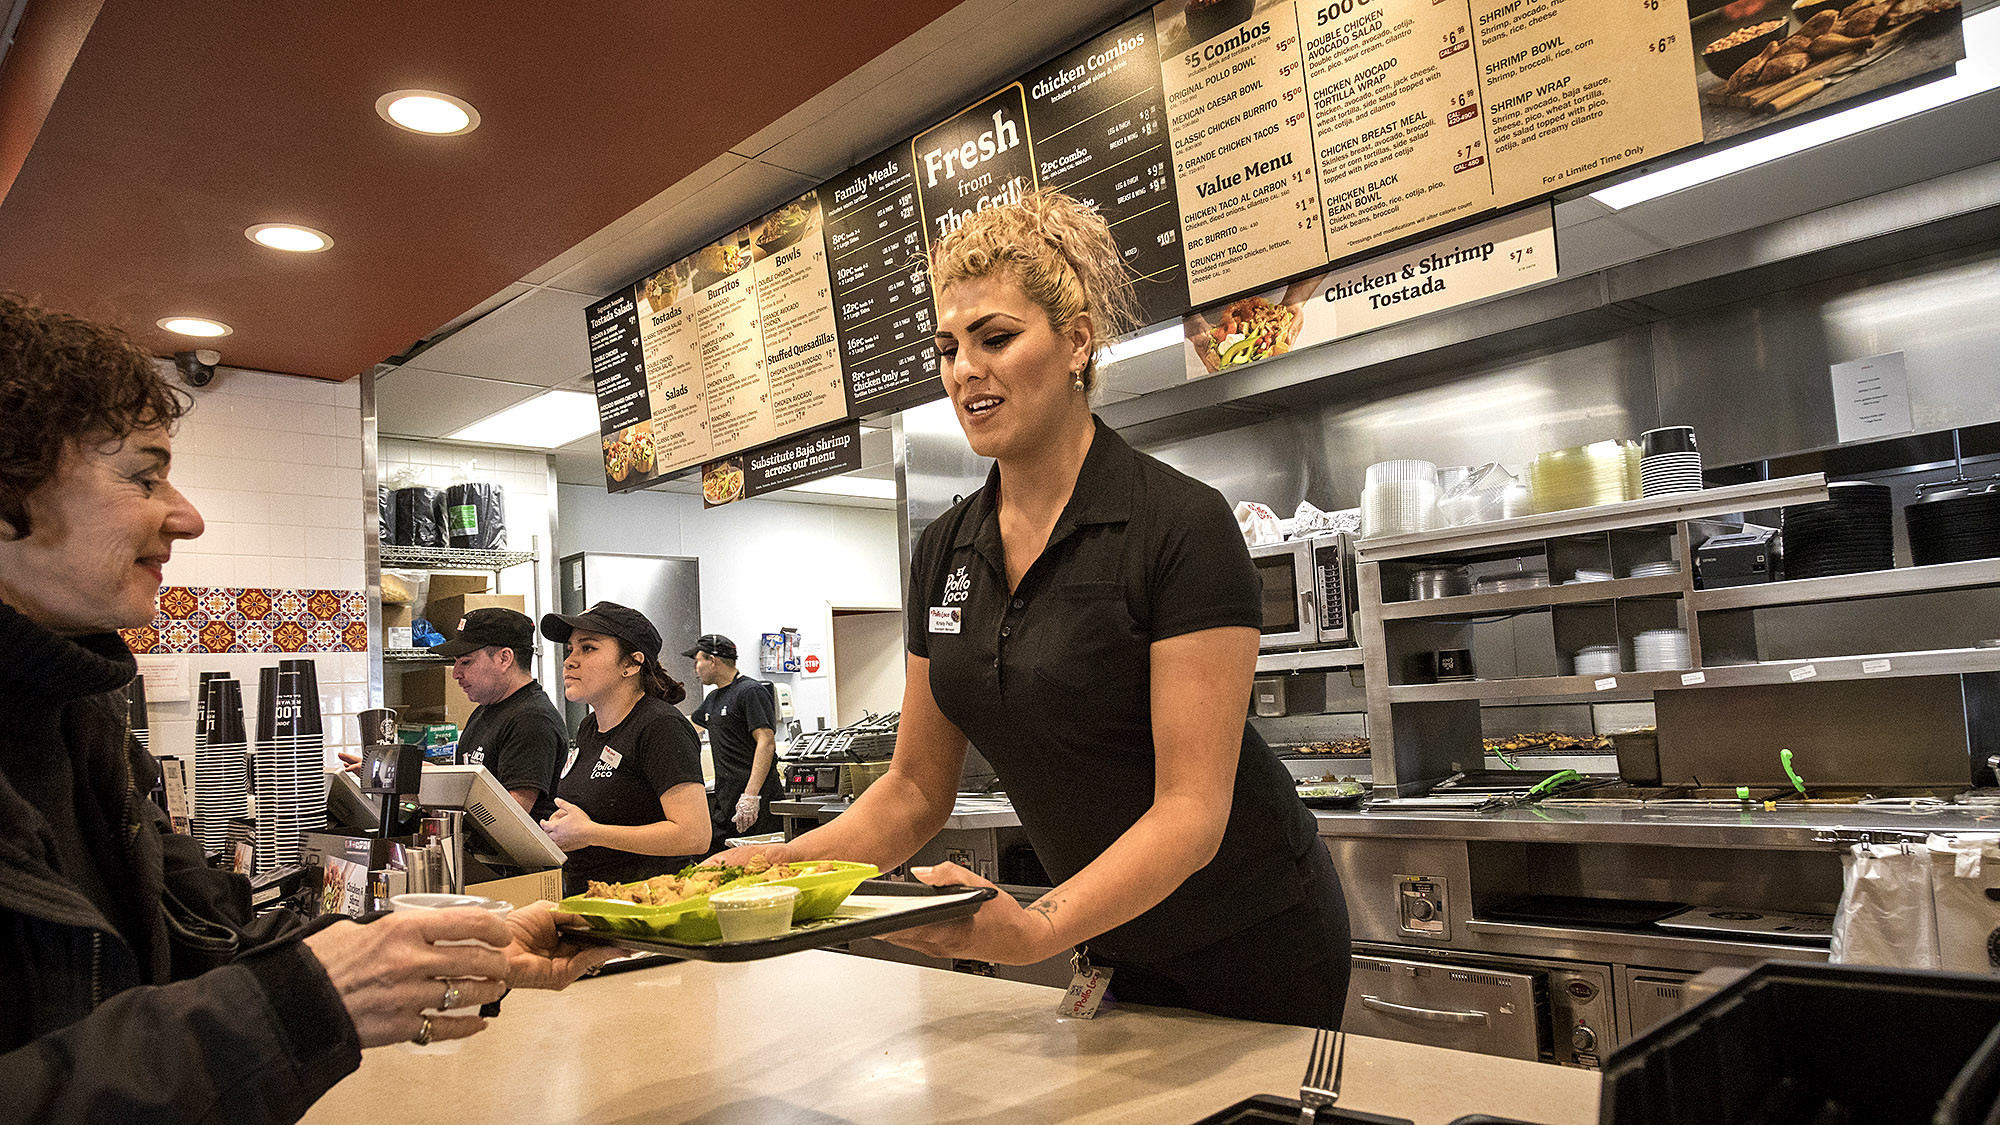 AGOURA HILLS, CA - MARCH 16, 2018 - Manager Kristy Ramirez, a transgender woman, at work in the El P